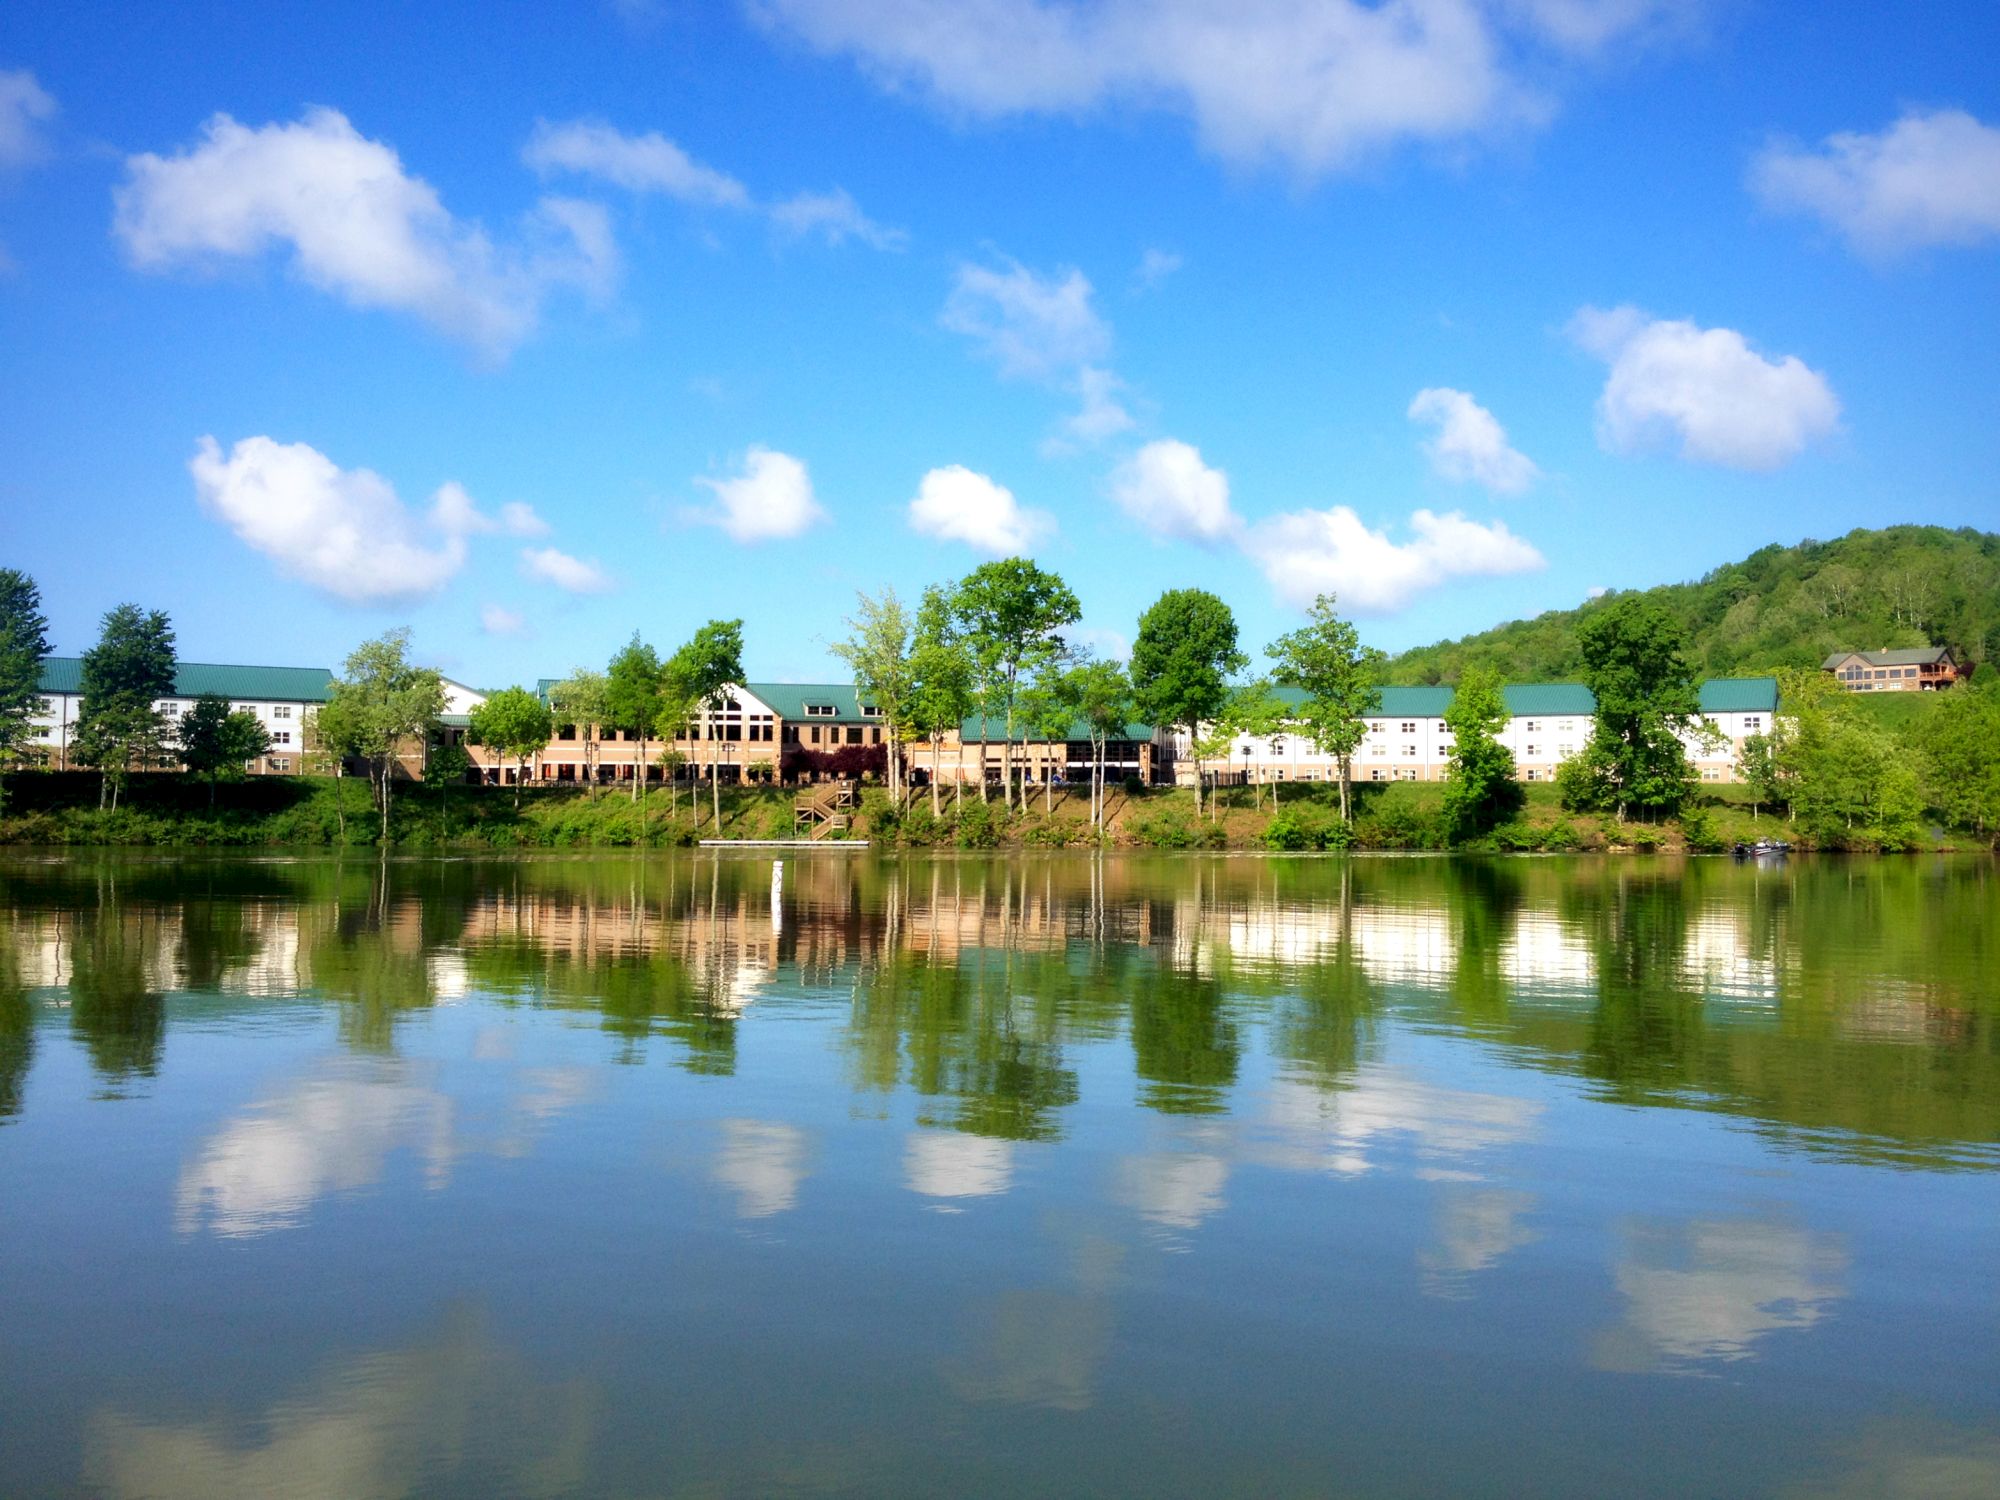 A scenic view of buildings and trees reflected in a calm body of water, under a bright blue sky with scattered clouds.